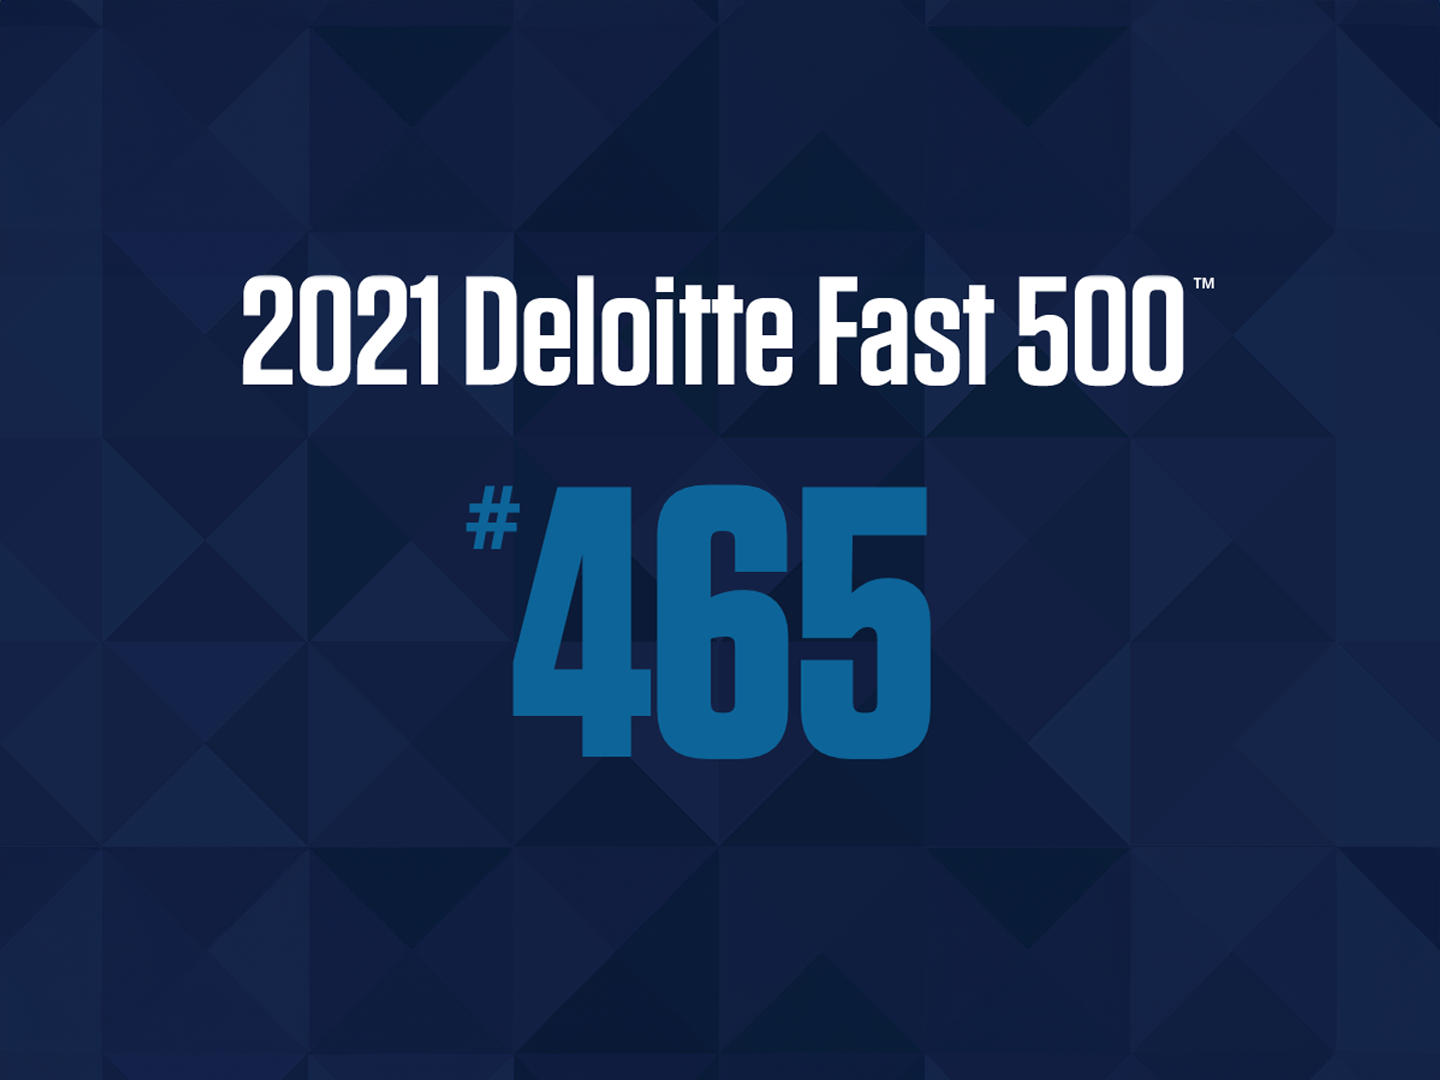 Dataminr Ranked Number 465 Fastest-Growing Company